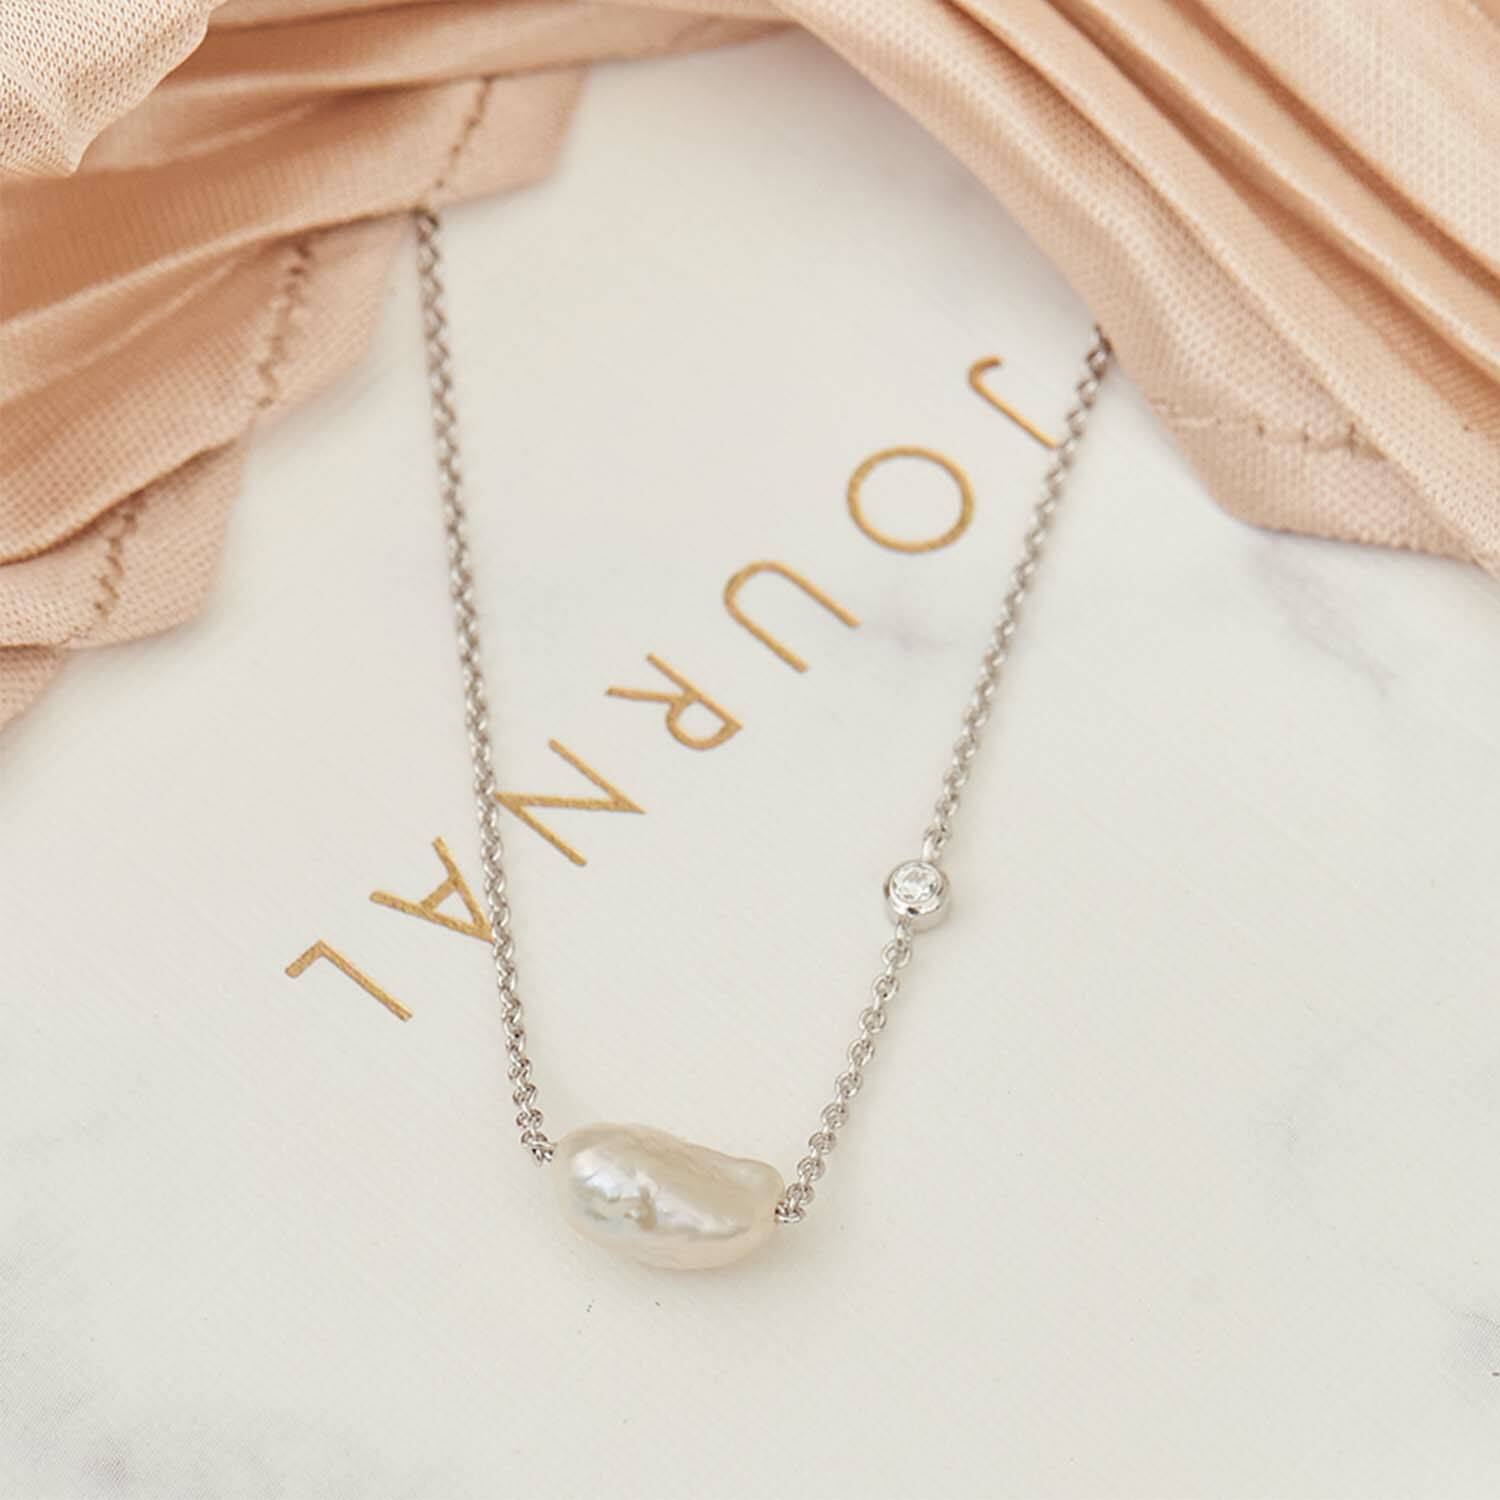 Pearl of Wisdom - Necklace - 33 - 38cm